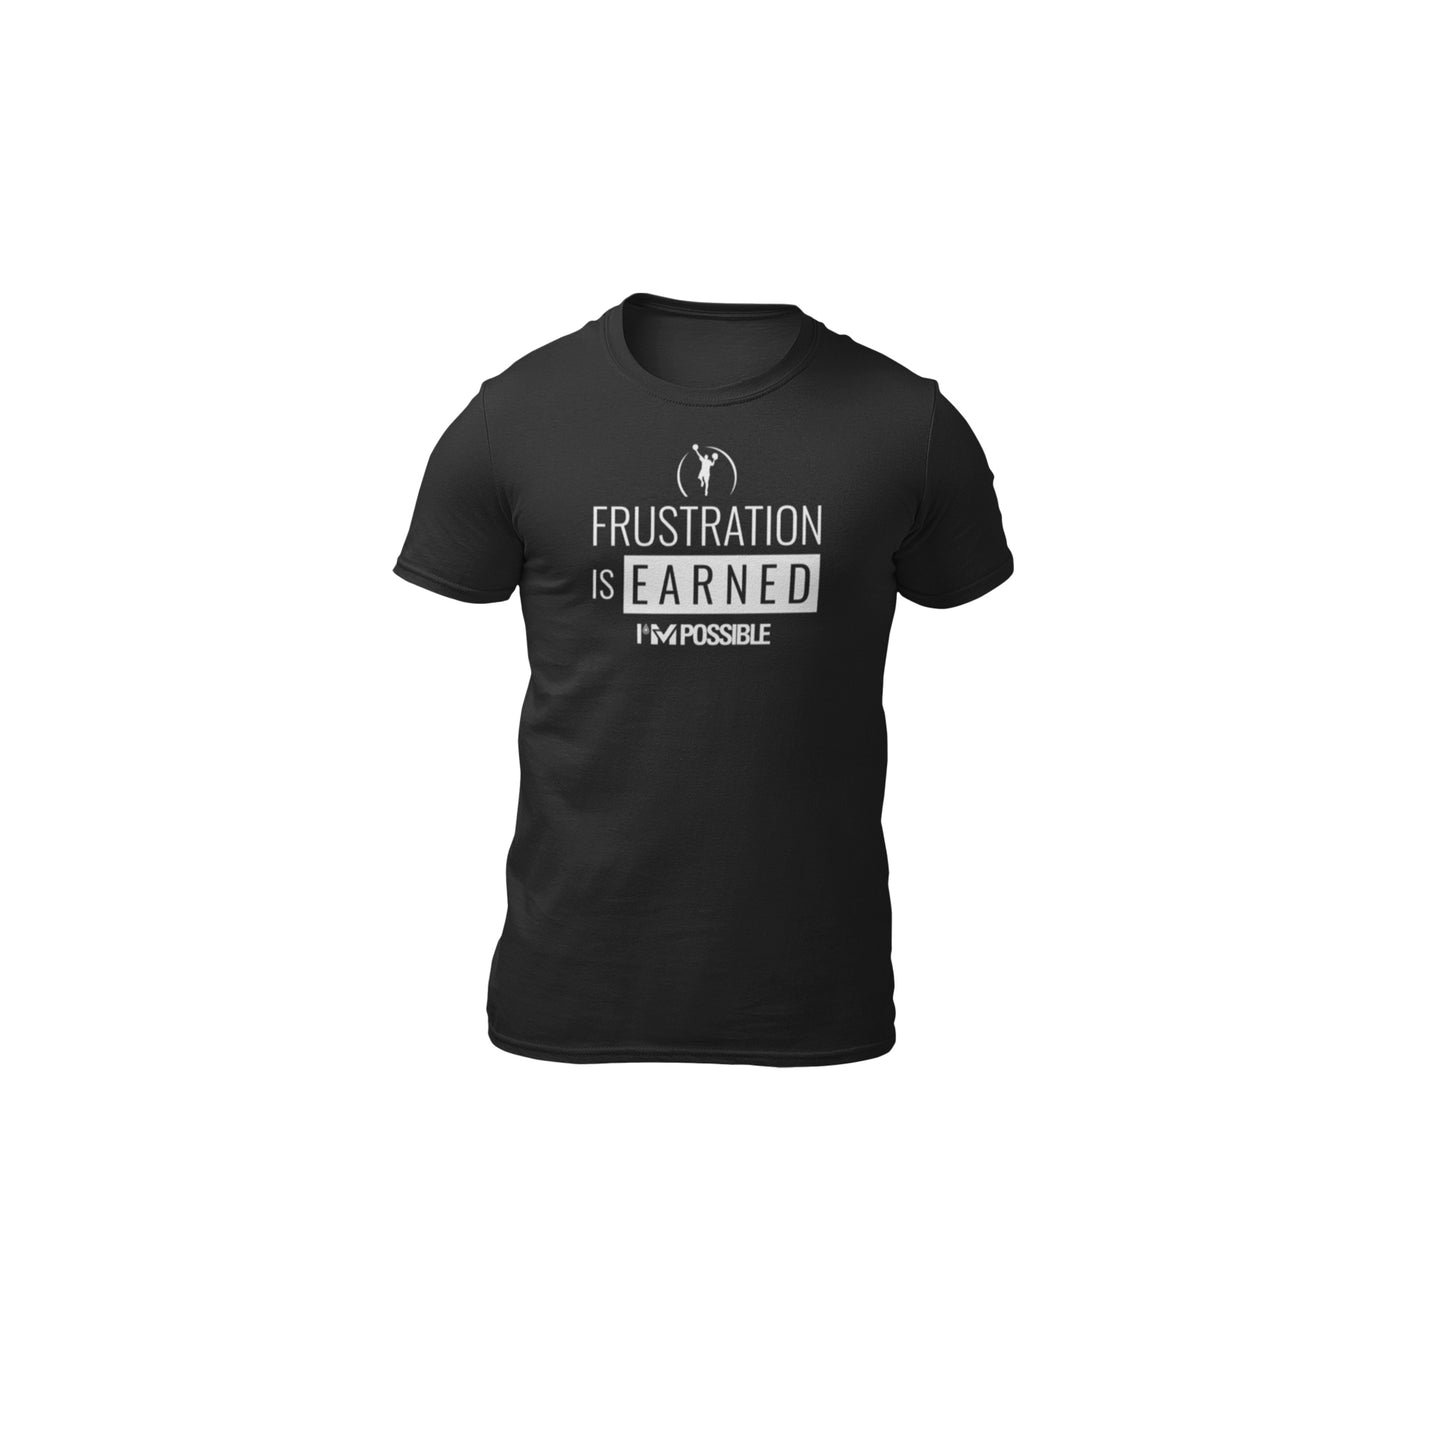 "FRUSTRATION IS EARNED" T-Shirt